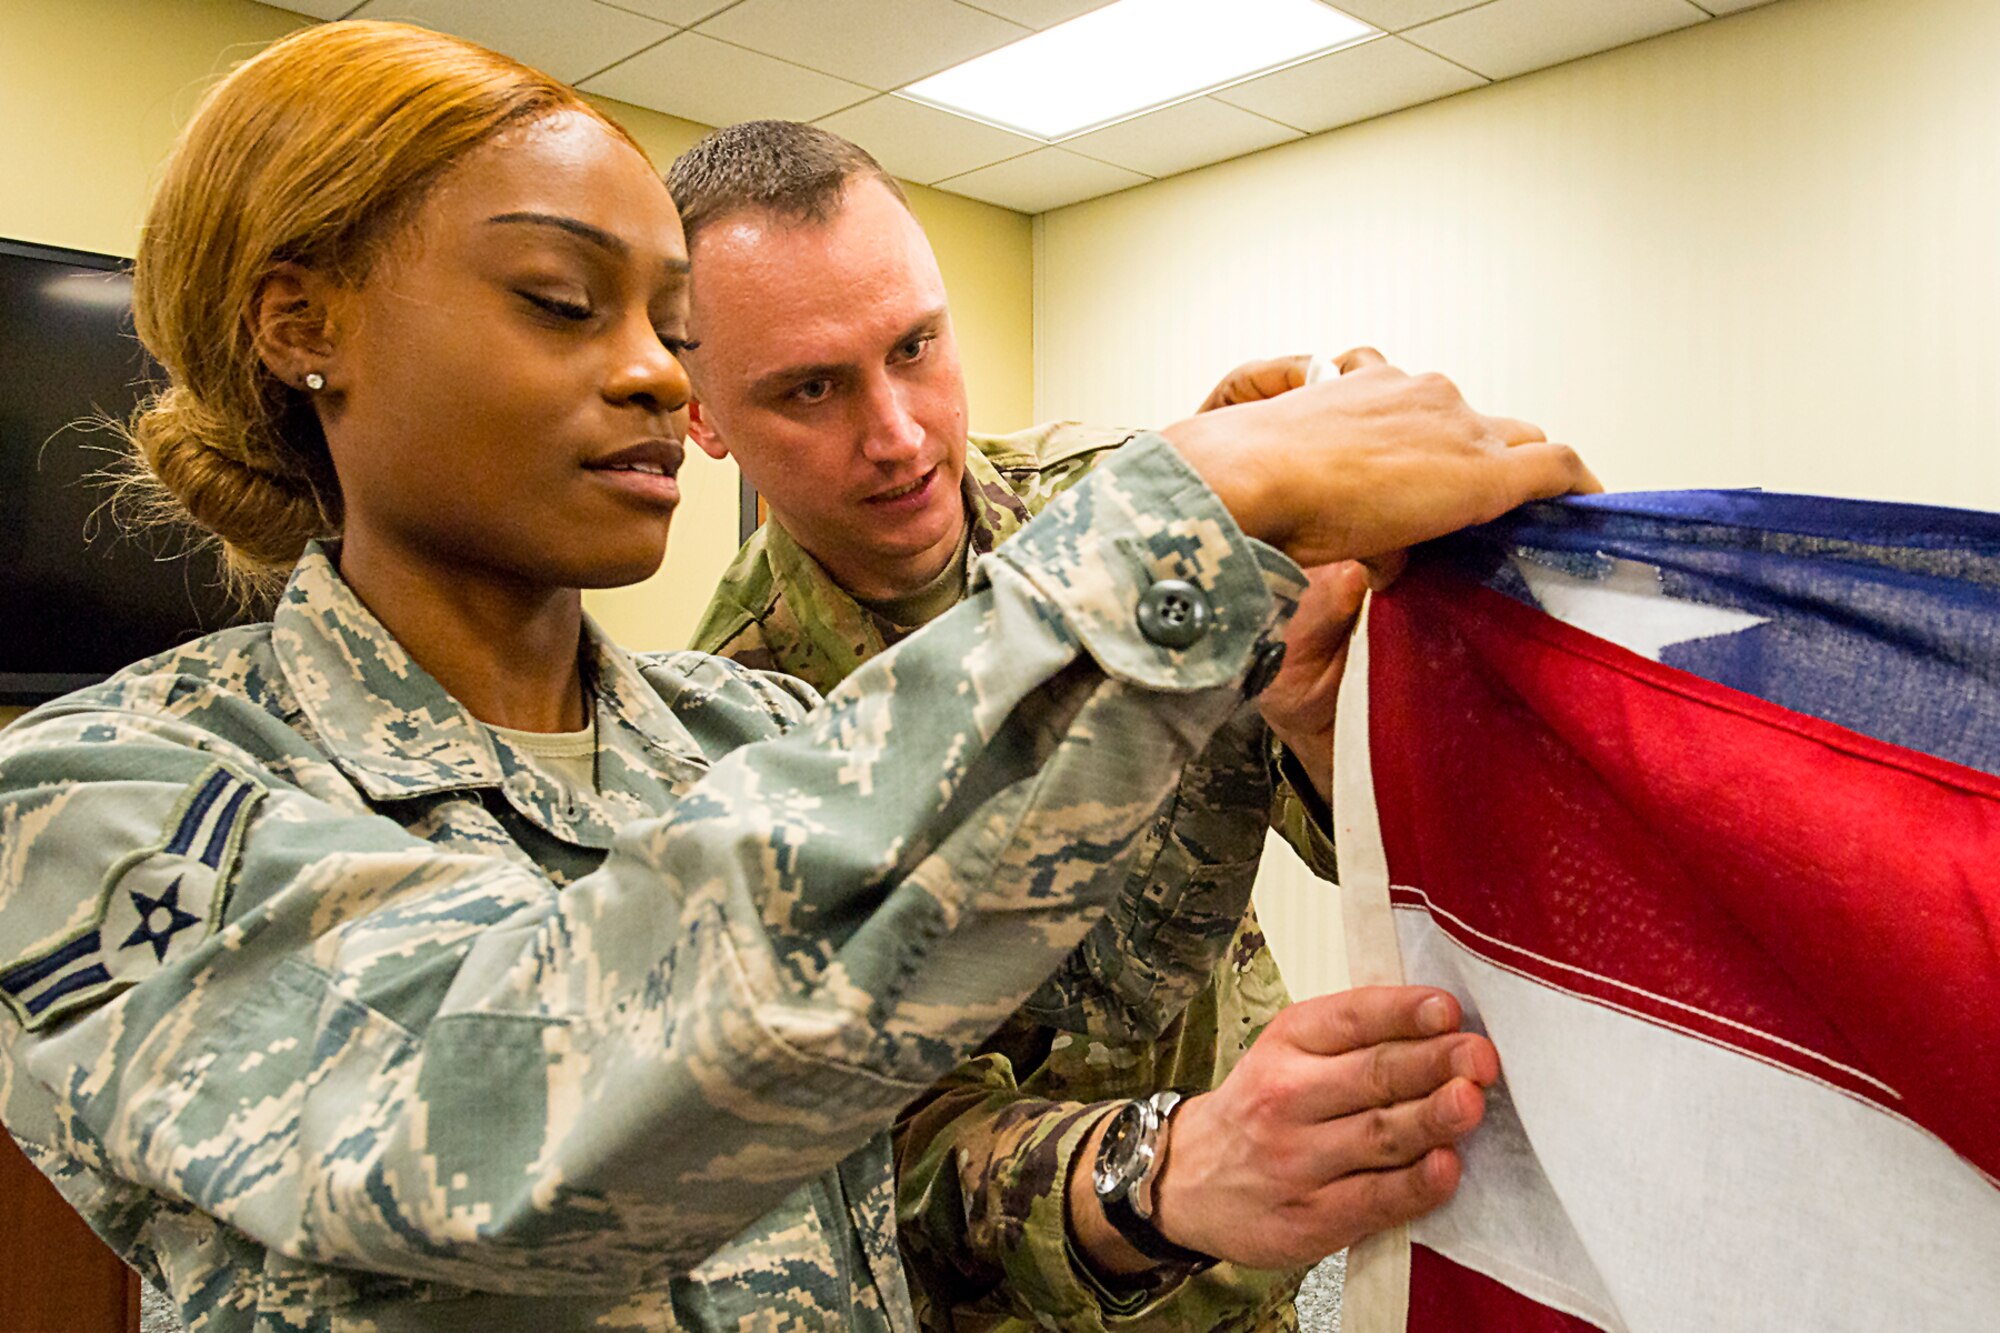 Airman 1st Class Alexis Cockle, a services apprentice with the 434th Force Support Squadron, receives training from Master Sgt. Adam Reynolds, Honor Guard program manager, on proper flag folding techniques during a training class held March 29, 2019 at Grissom. The Honor Guard is working to expand membership to support a variety of details. (U.S. Air Force photo/Douglas Hays)